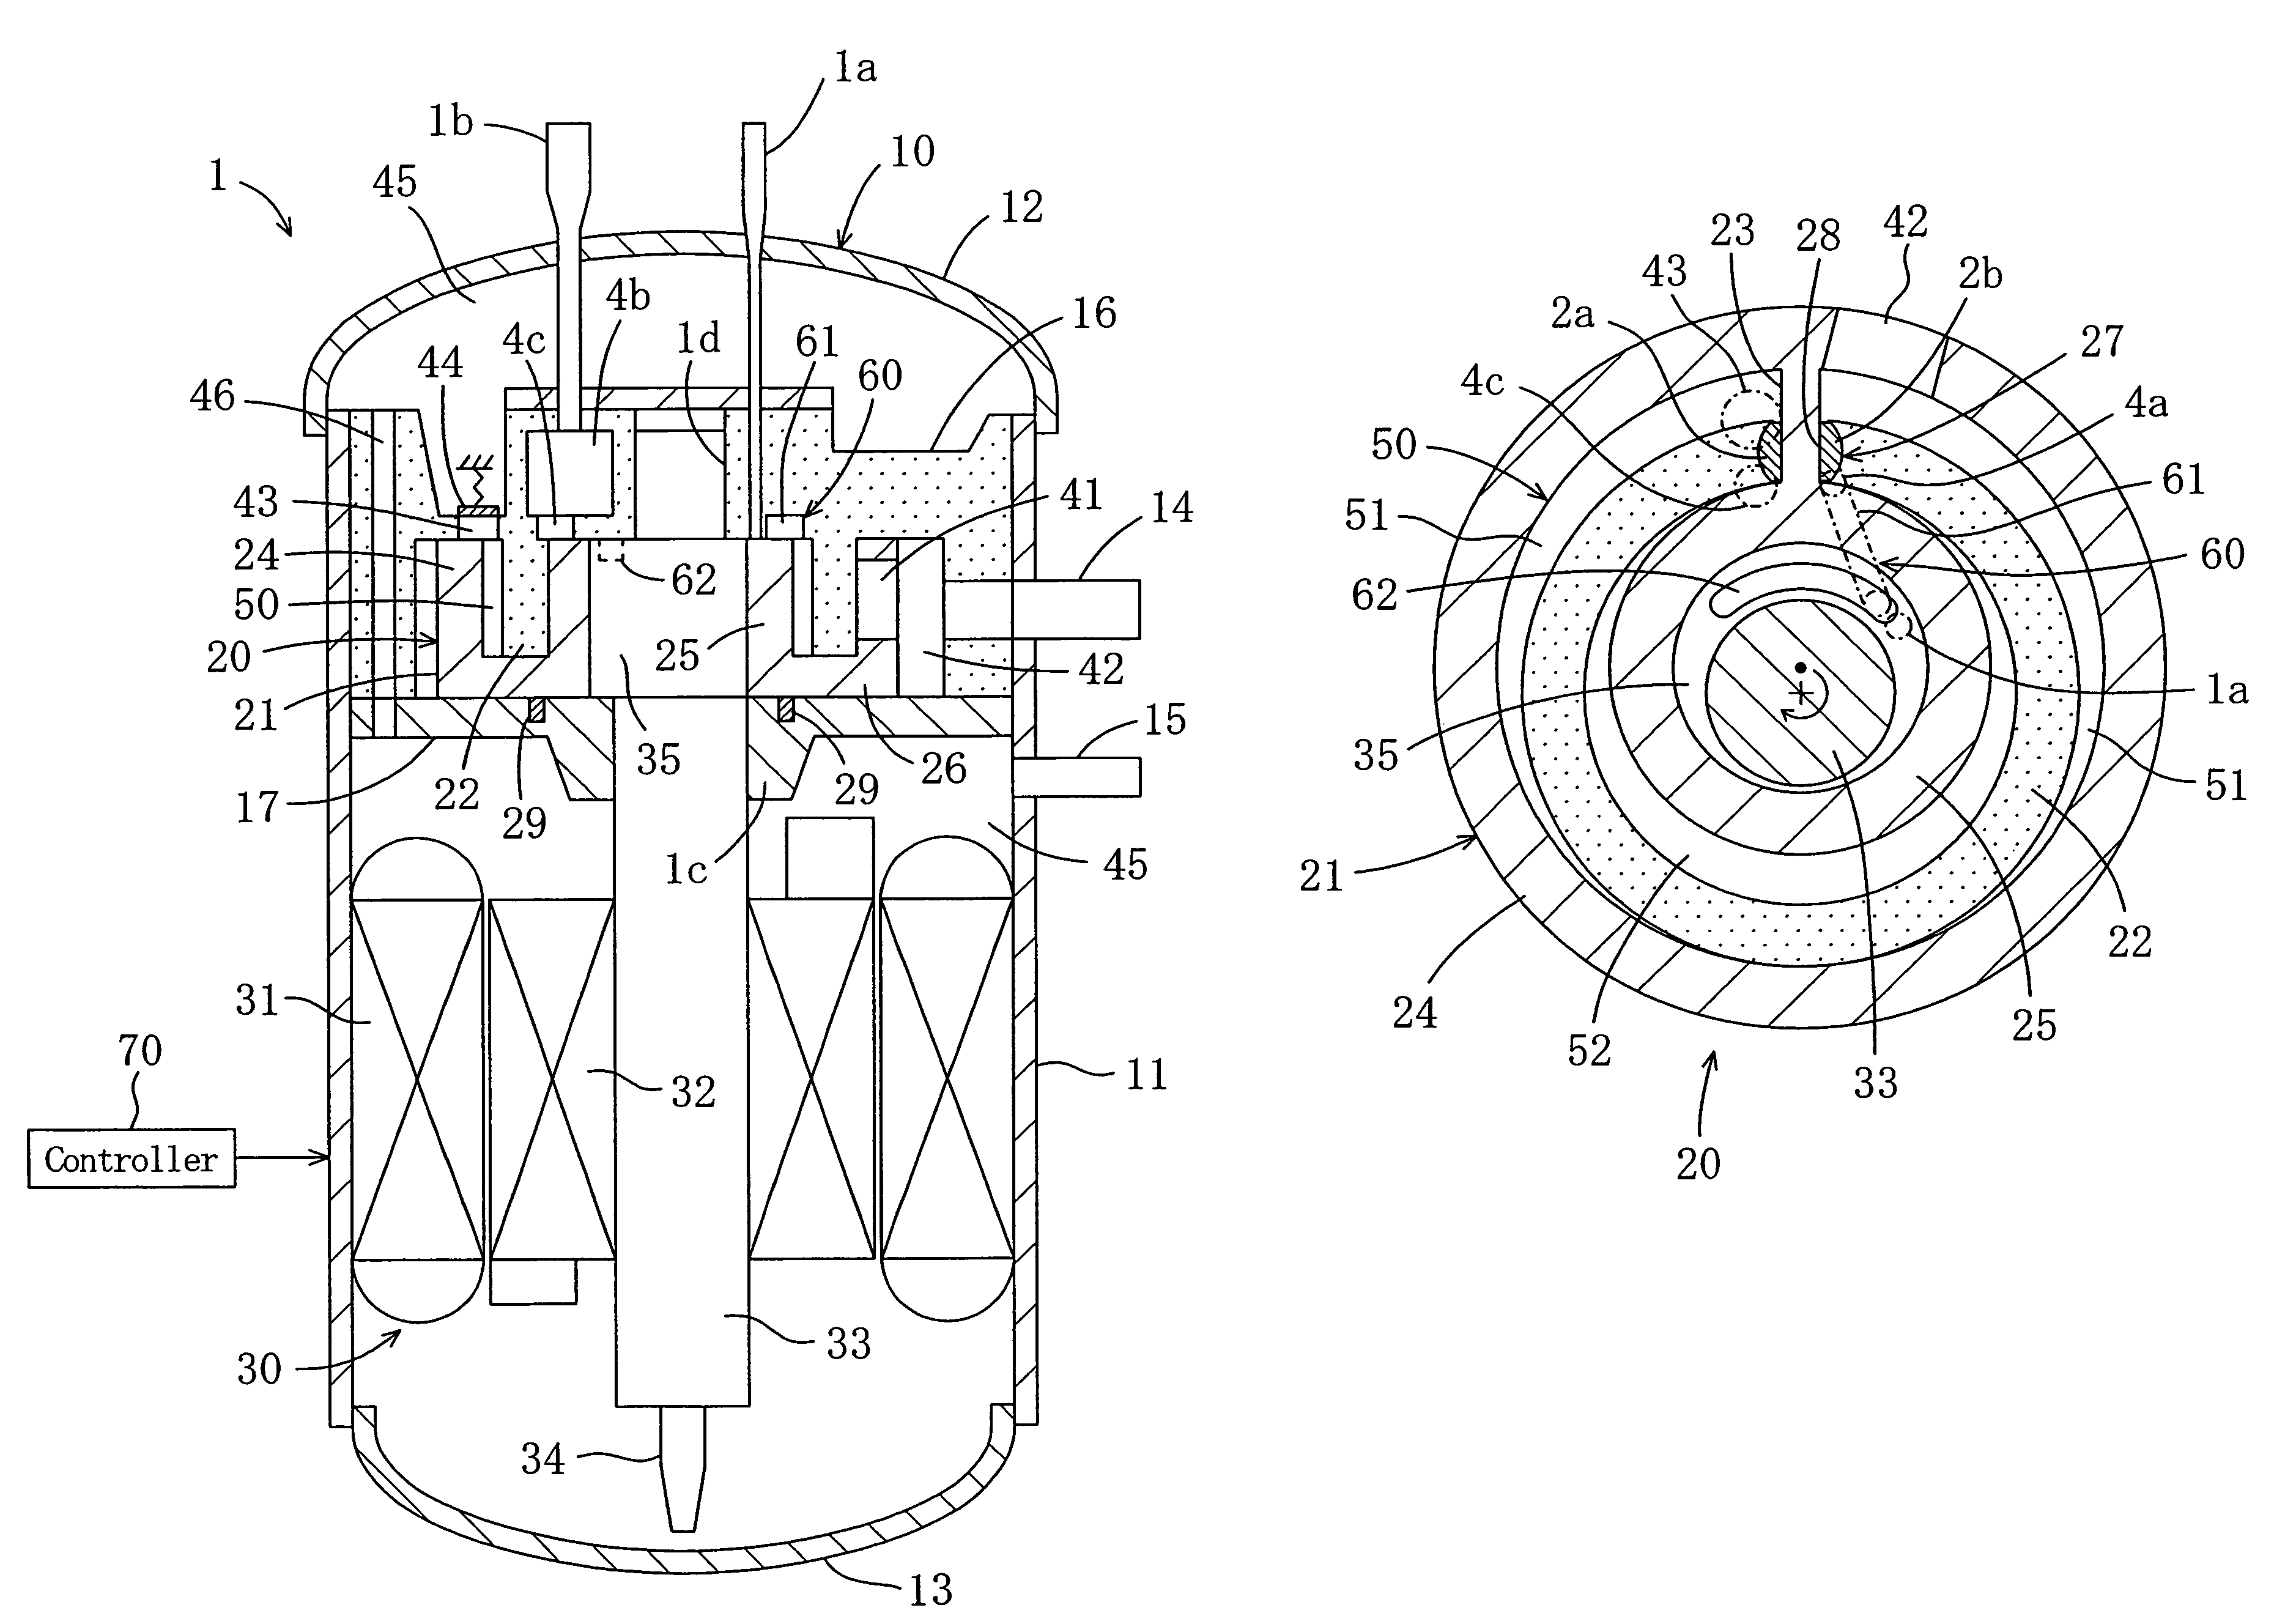 Rotary fluid device performing compression and expansion of fluid within a common cylinder